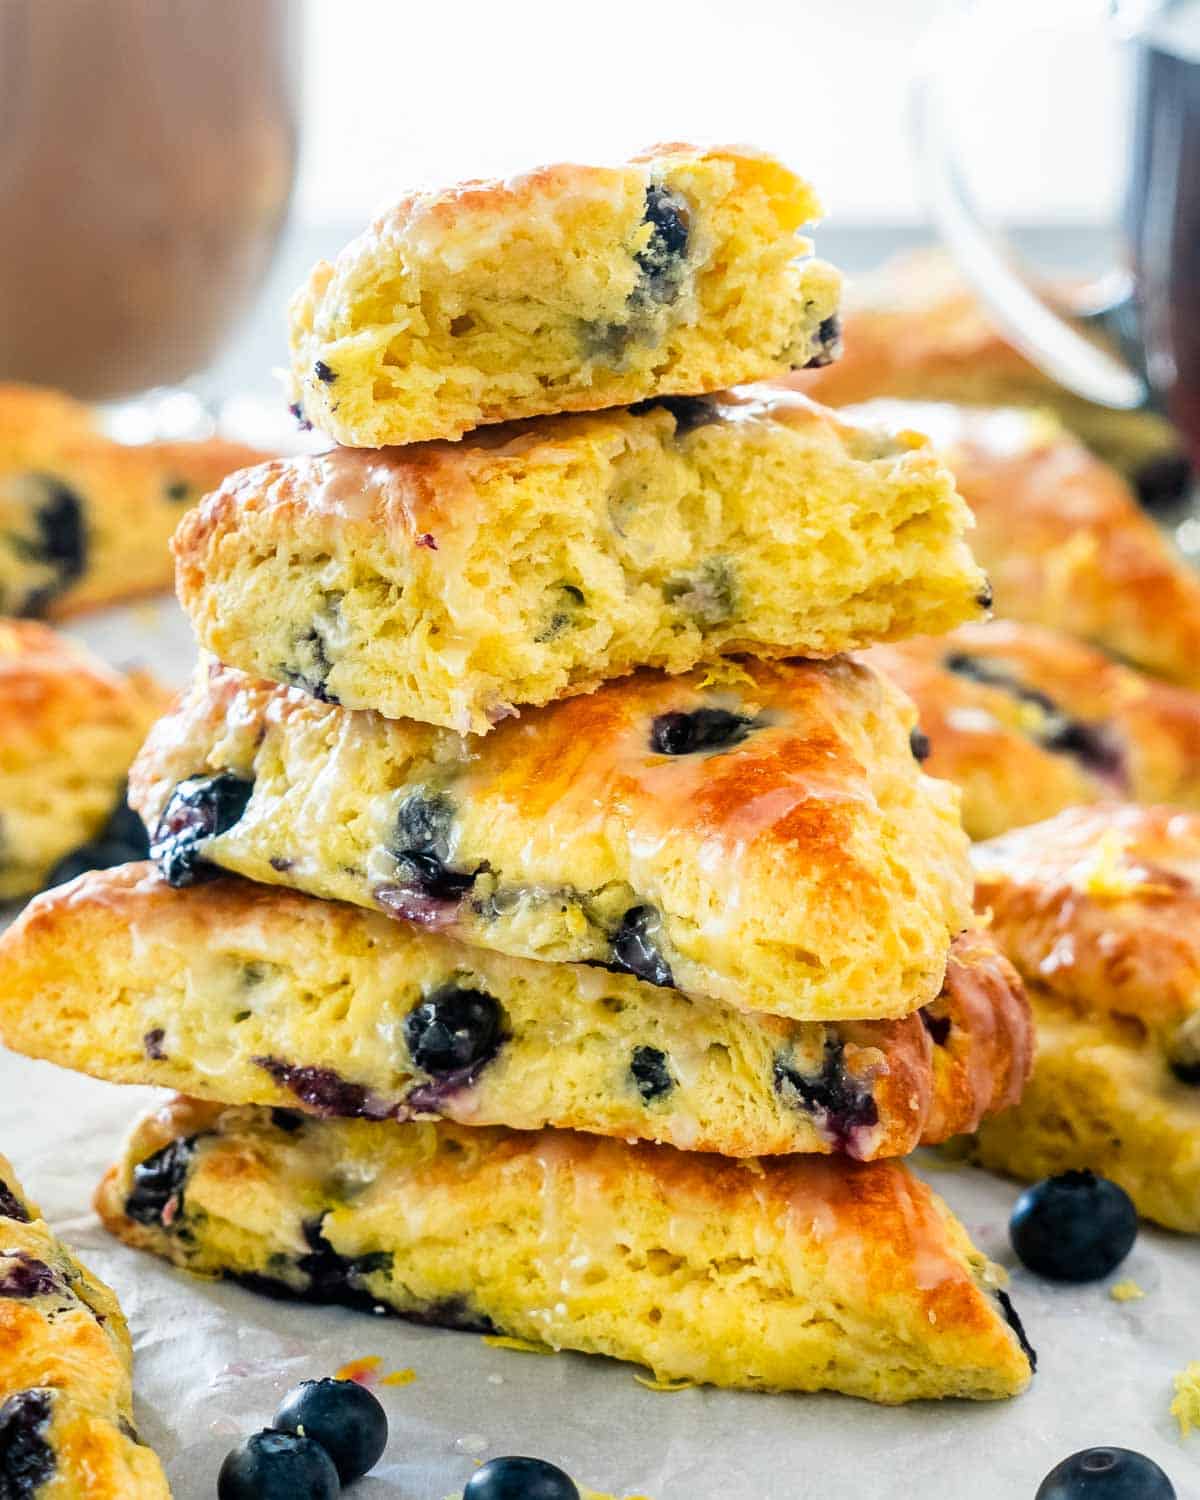 lemon blueberries scones scattered on a table with some blueberries in between.